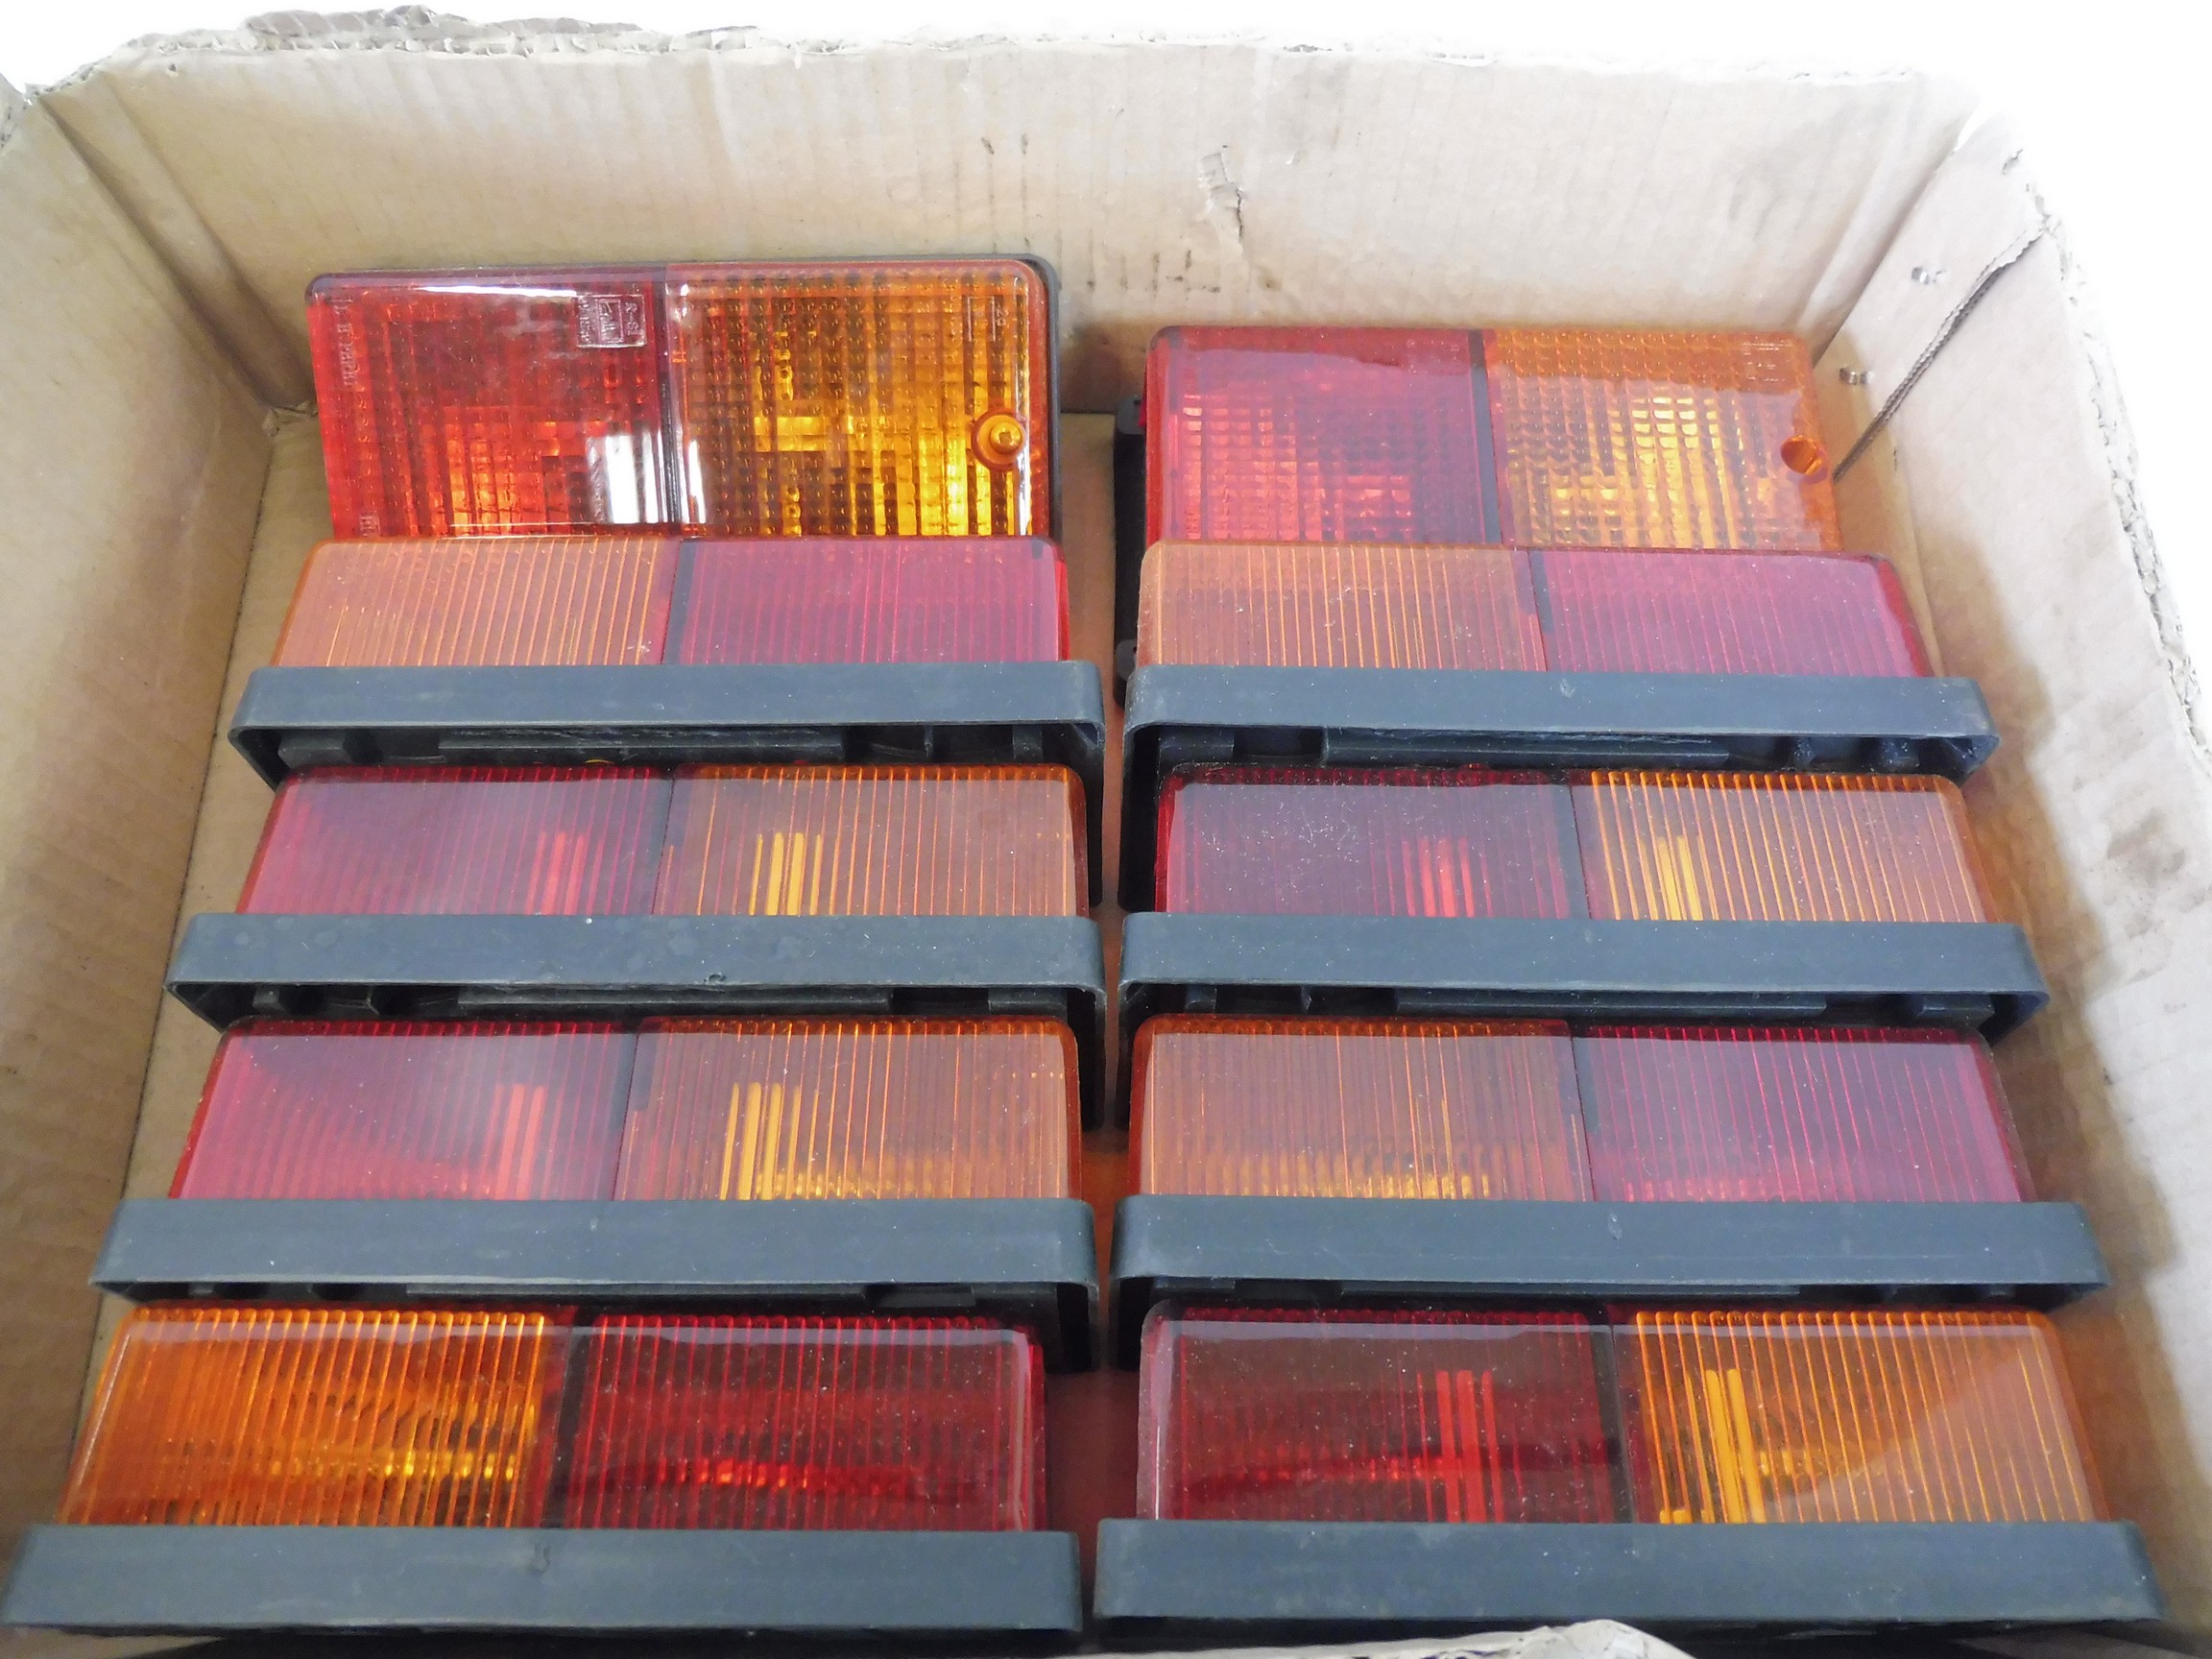 A box of new trailer lights.